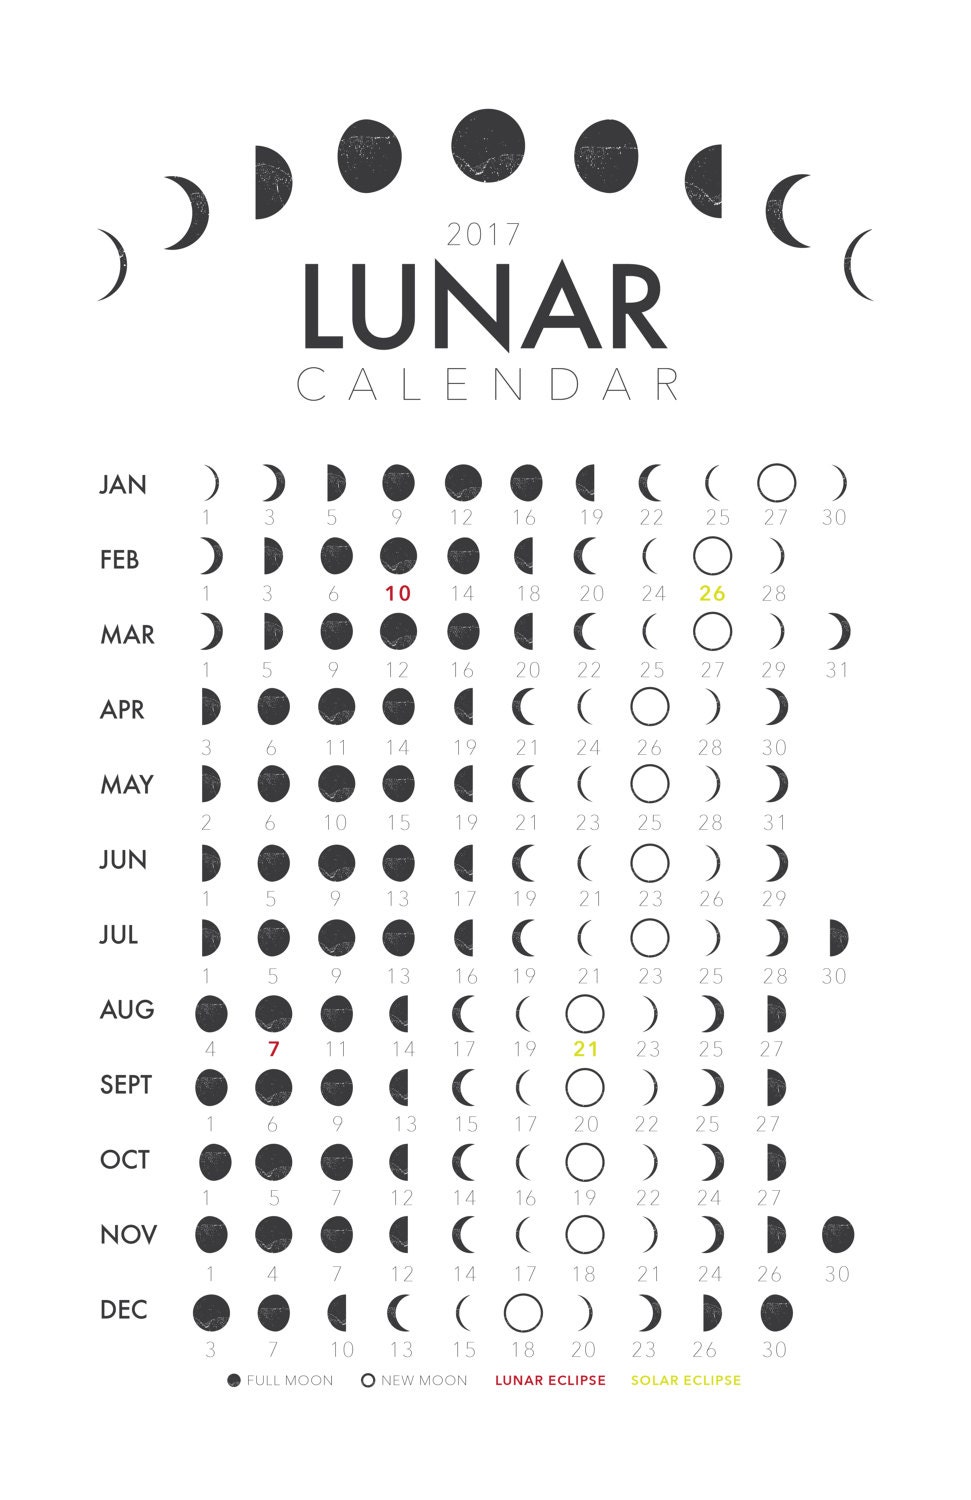 Lunar Pro download the last version for iphone